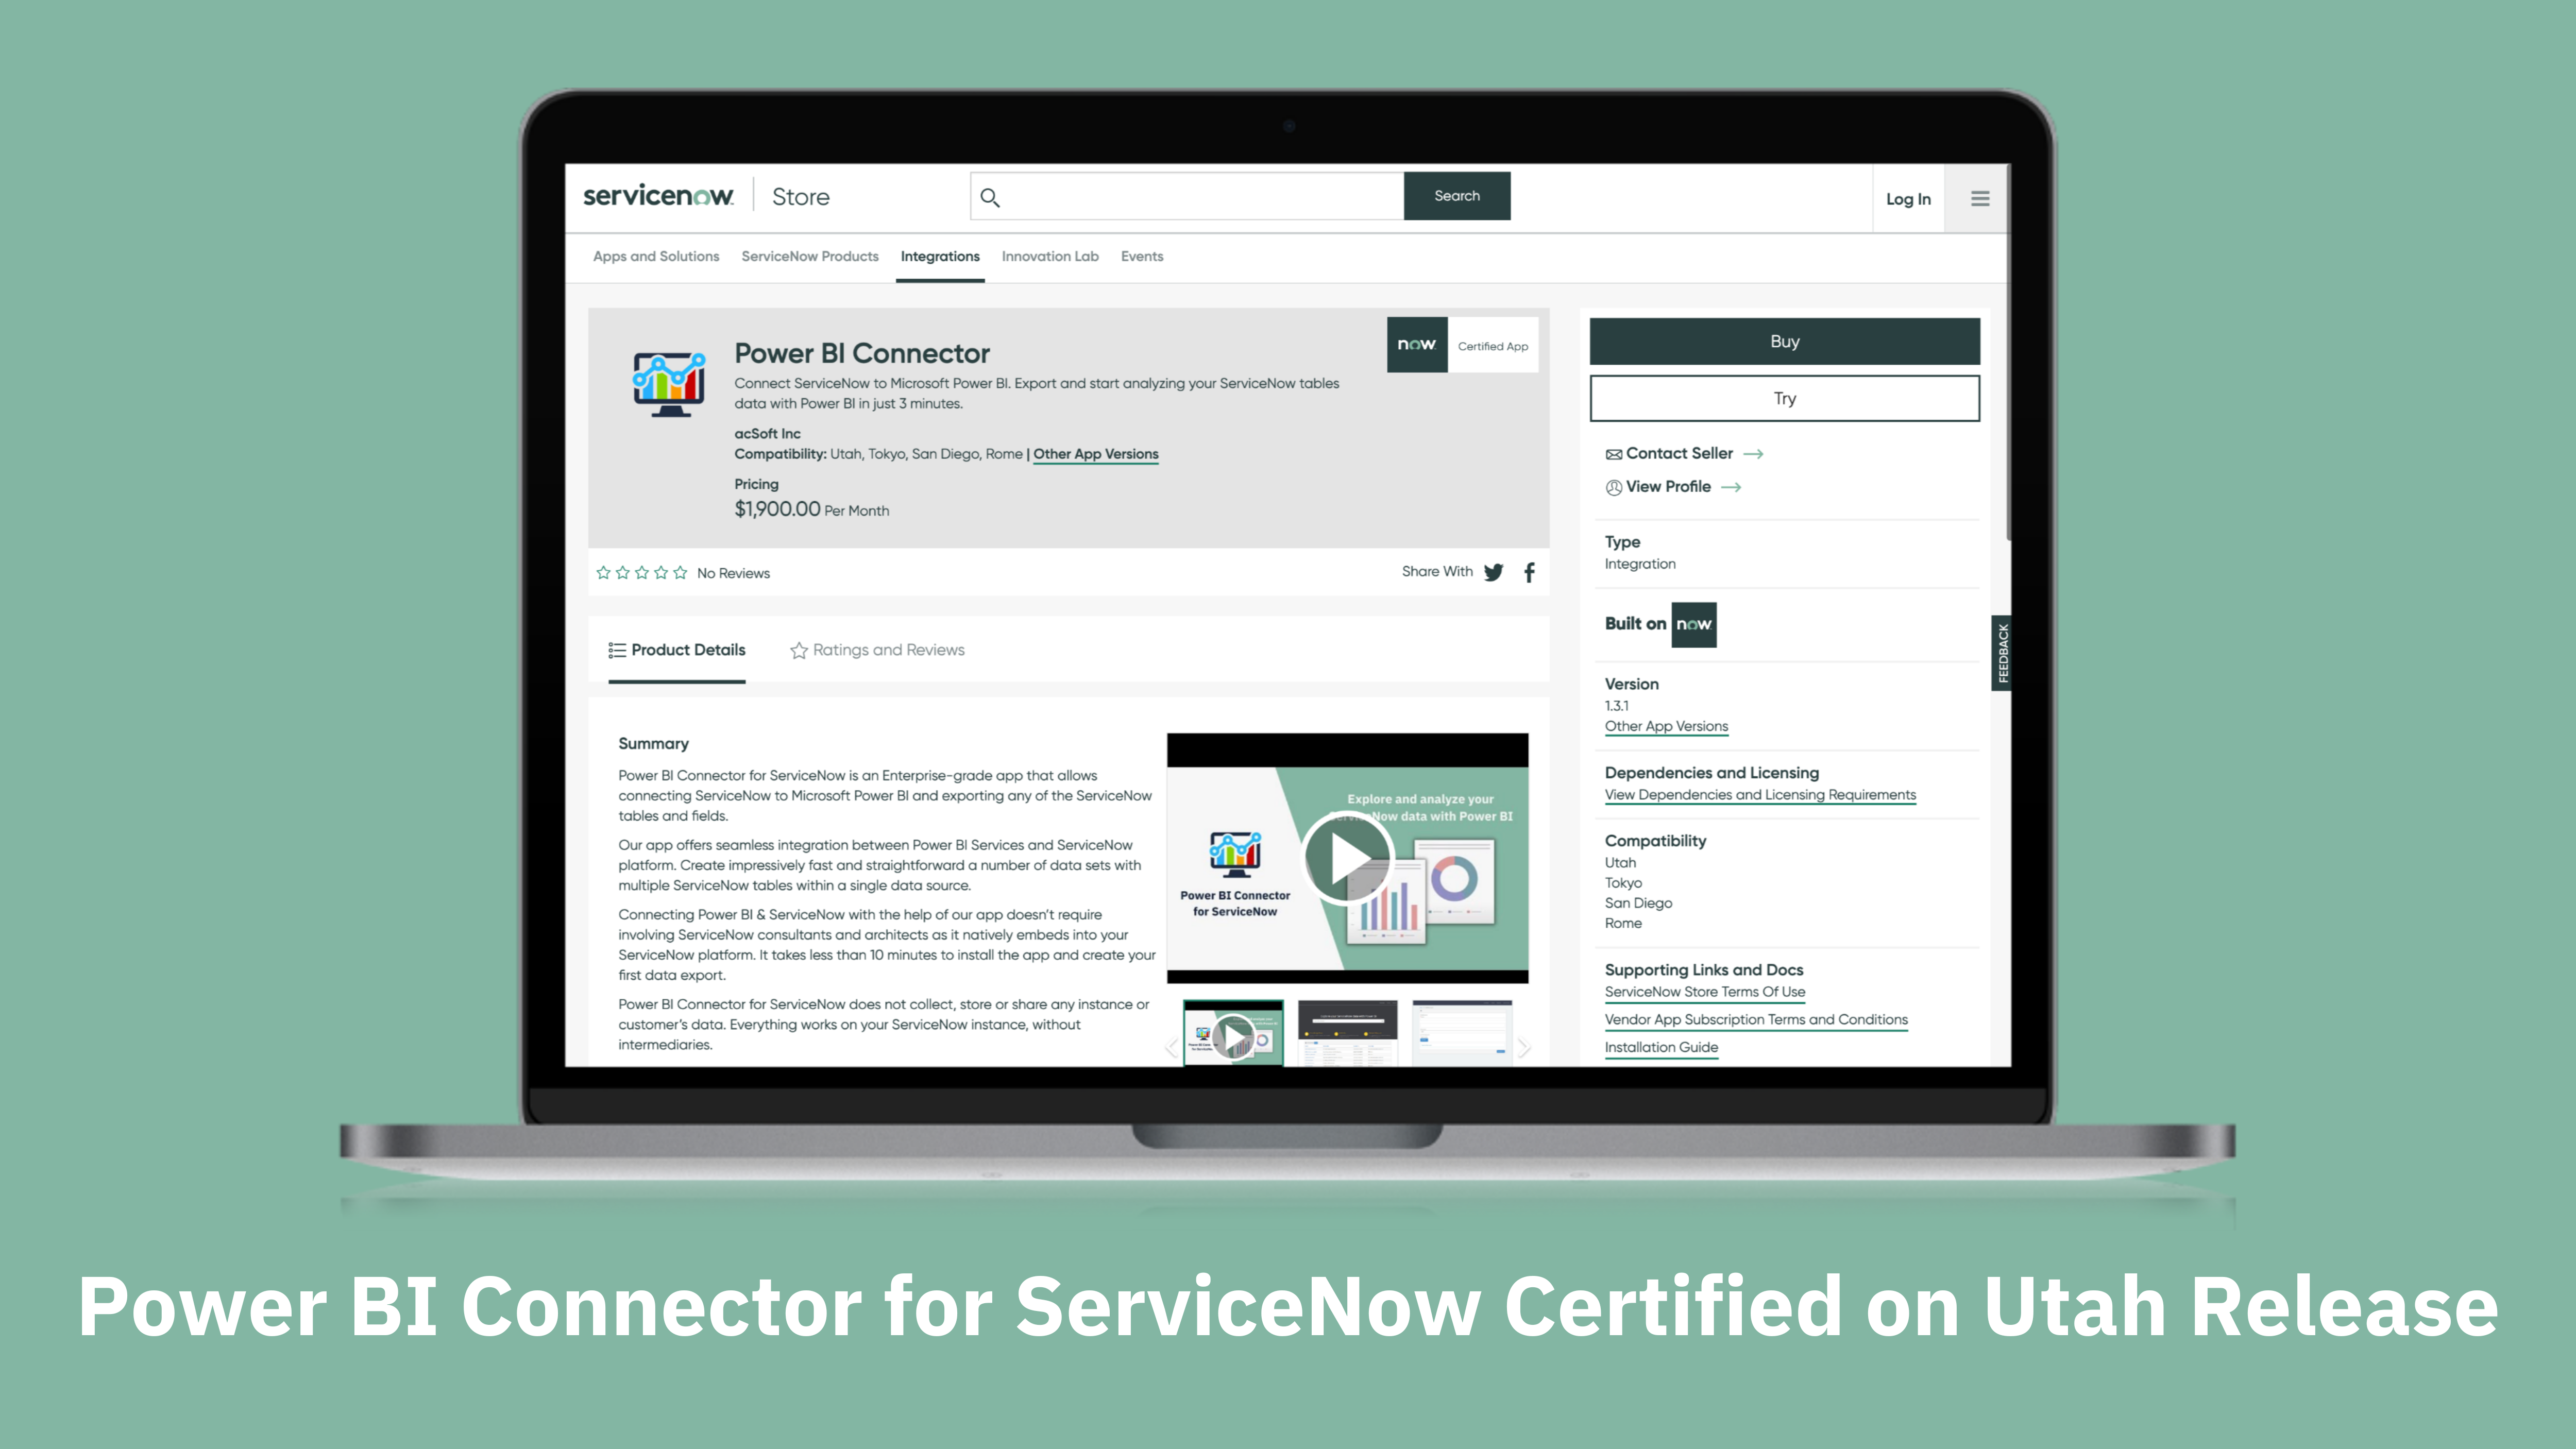 Power BI Connector for ServiceNow Certified on Utah Release